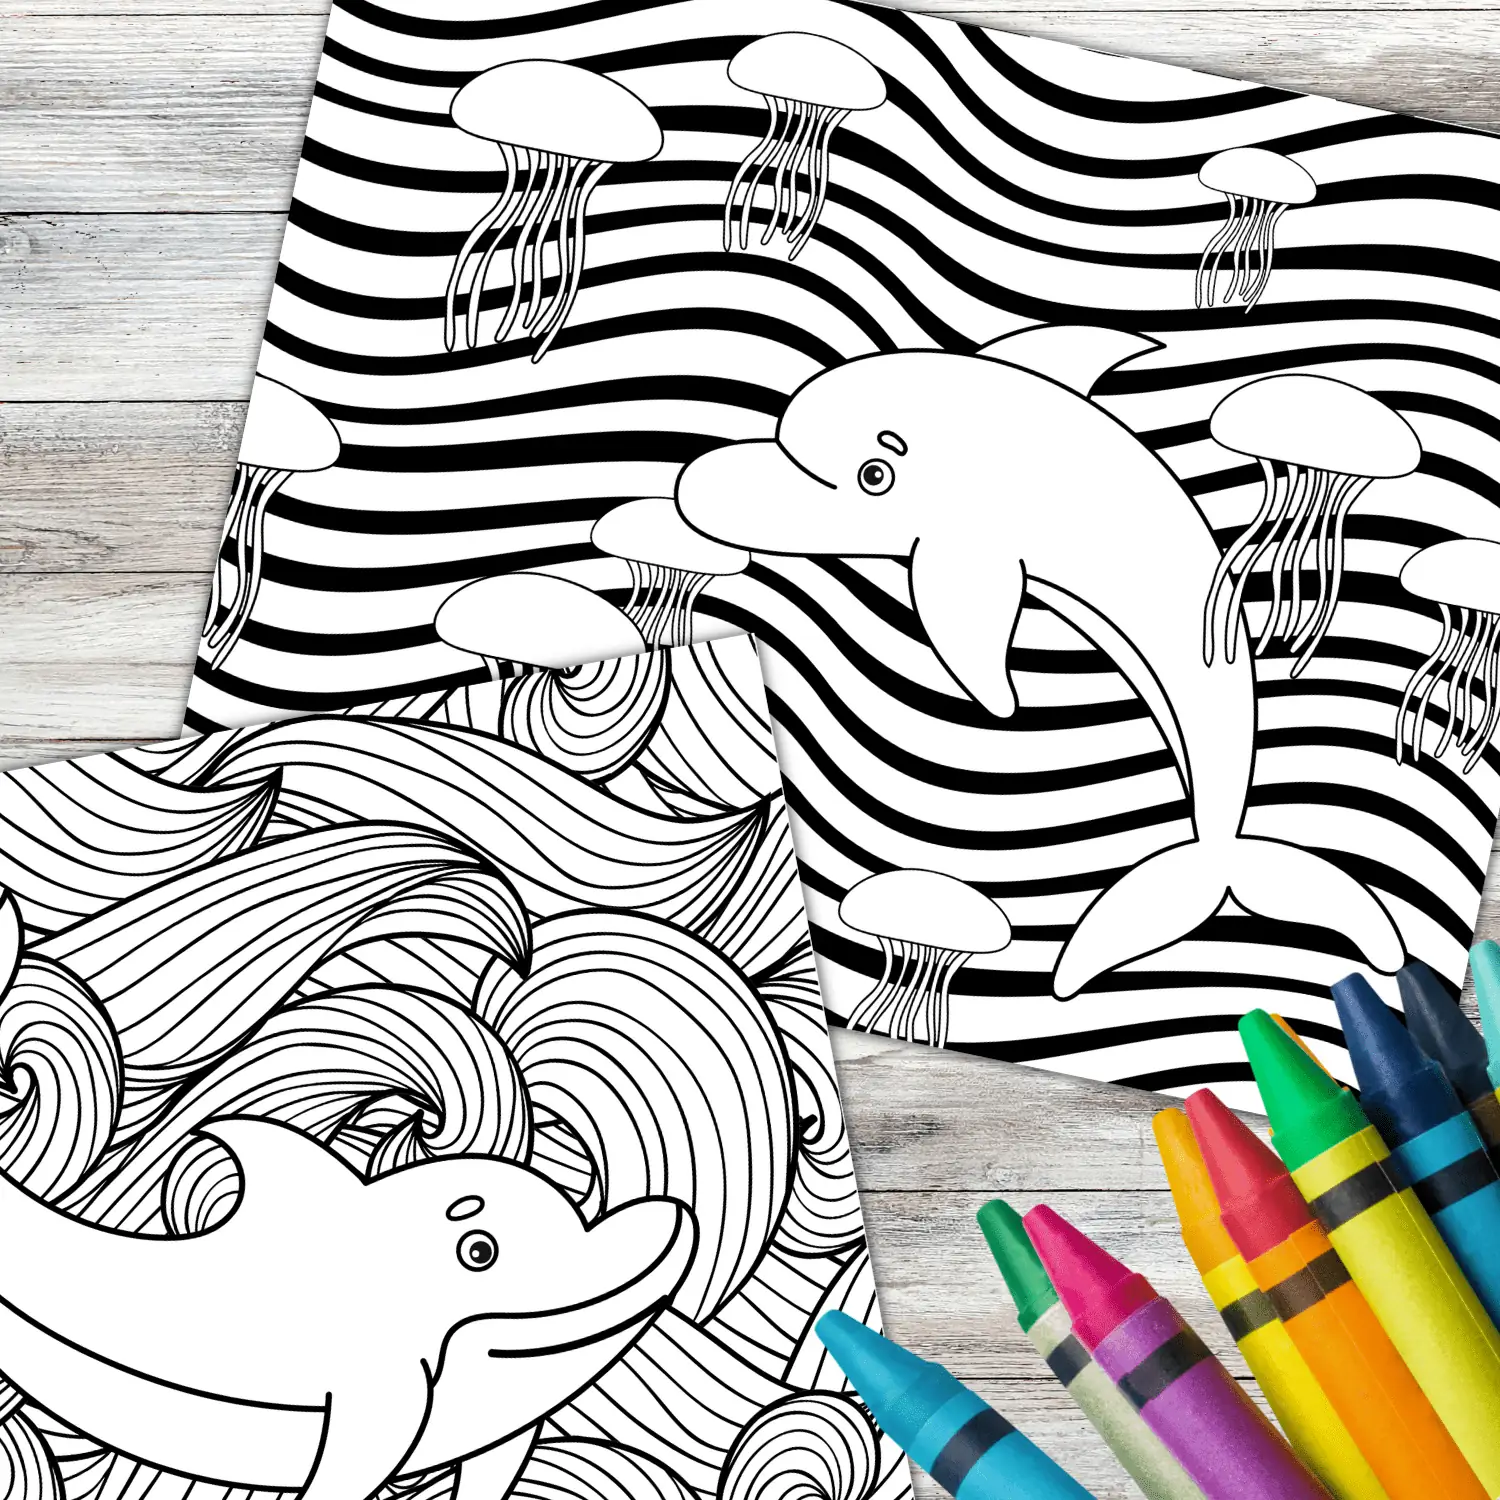 Dolphin coloring pages free printable â in the bag kids crafts